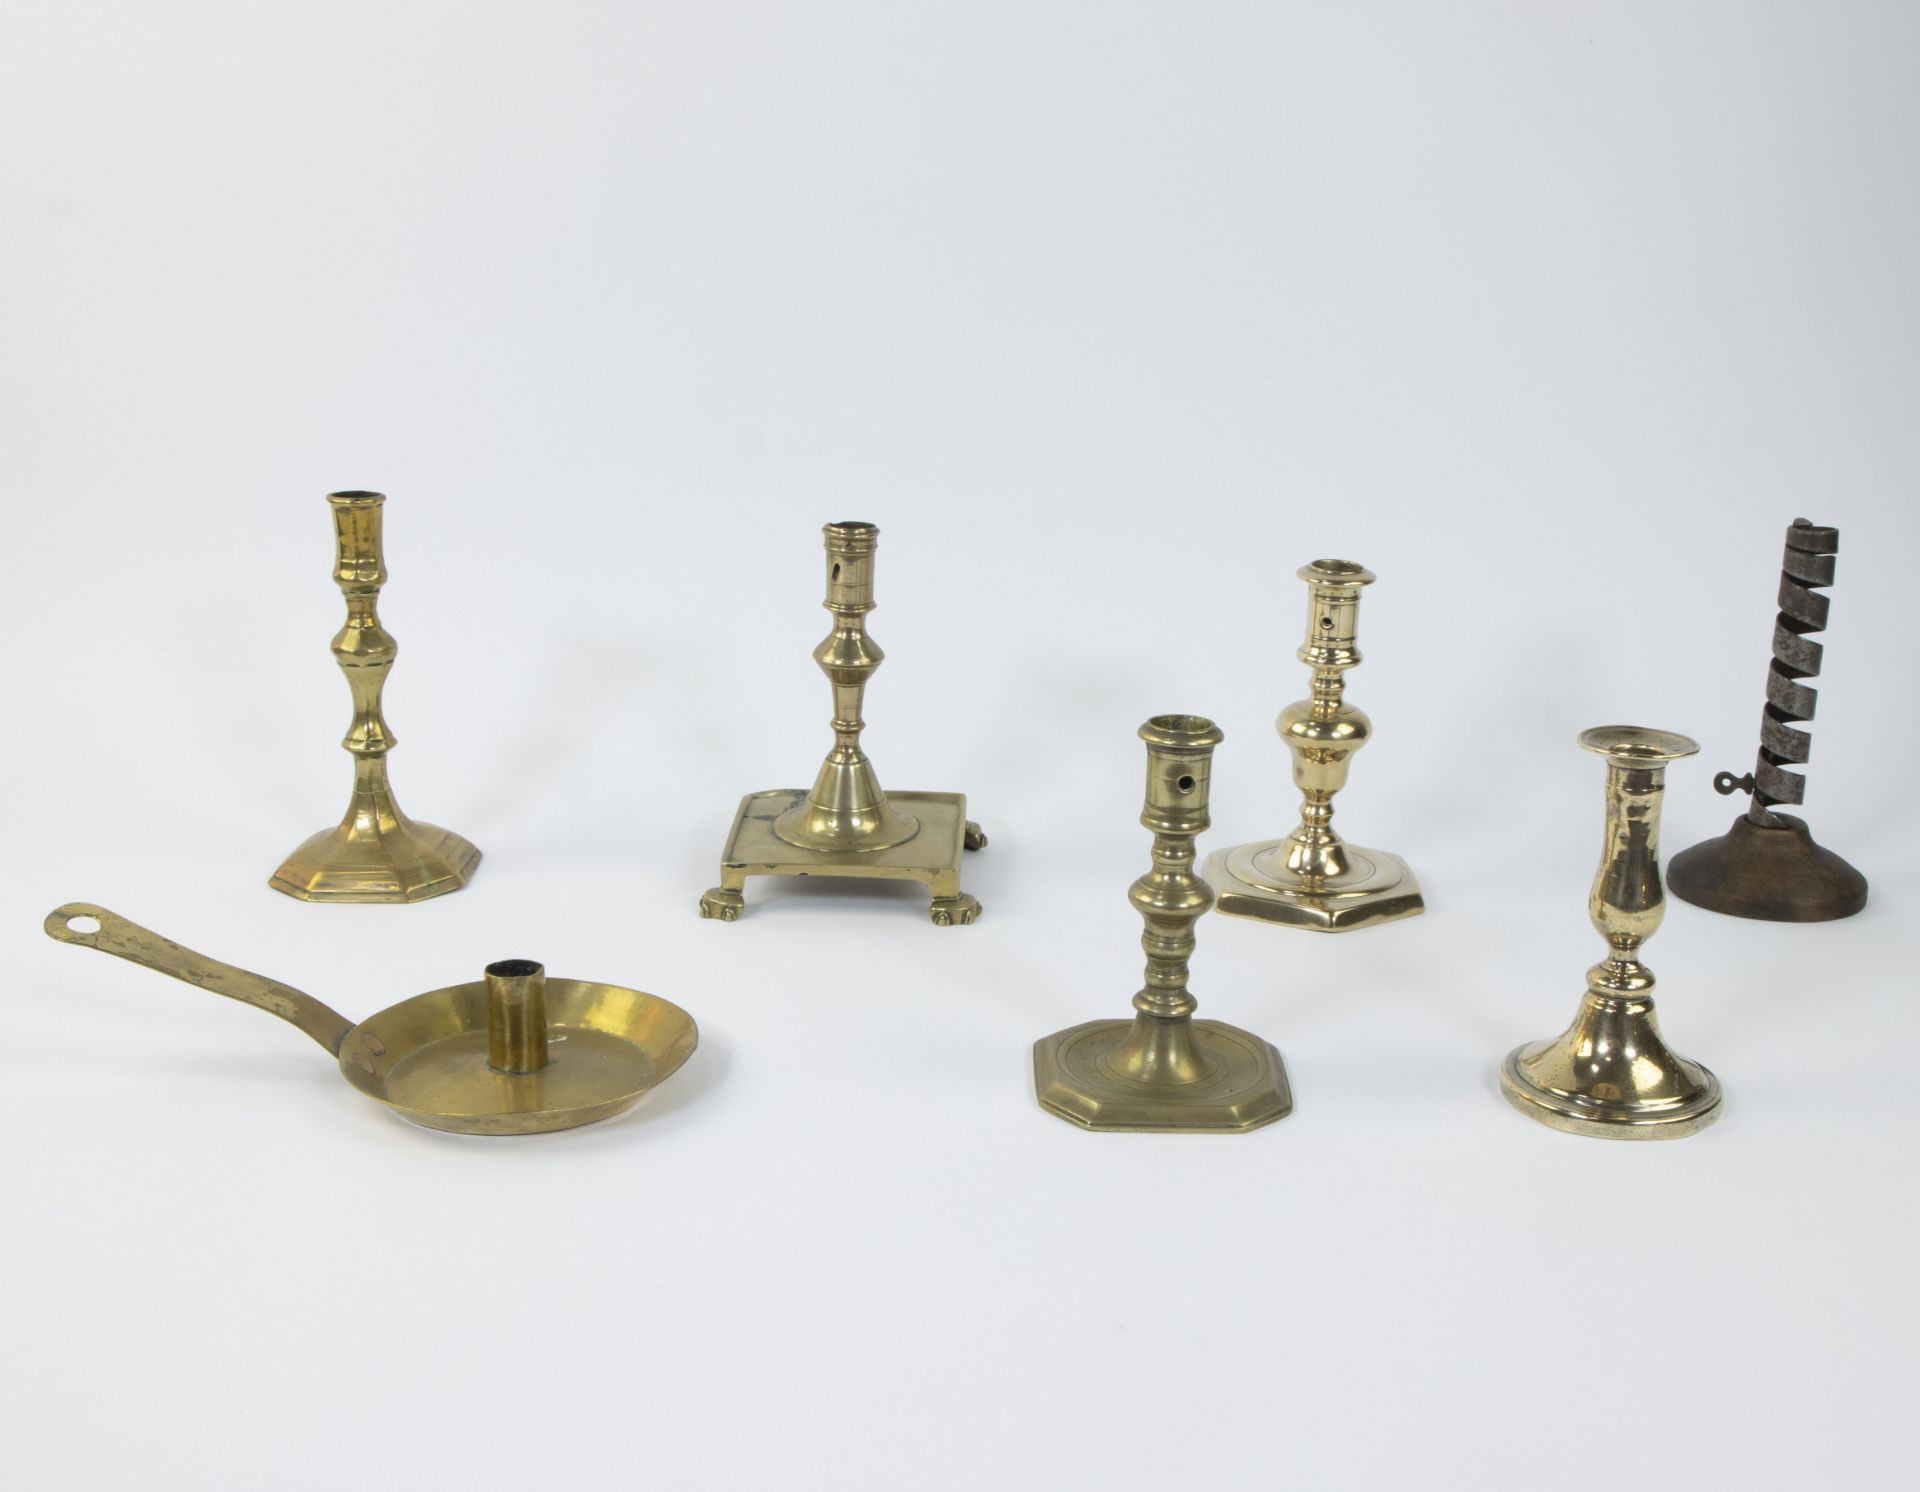 Collection of candlesticks, brass and iron, 17th/18th century, Western European (Spanish, French, Du - Image 4 of 4